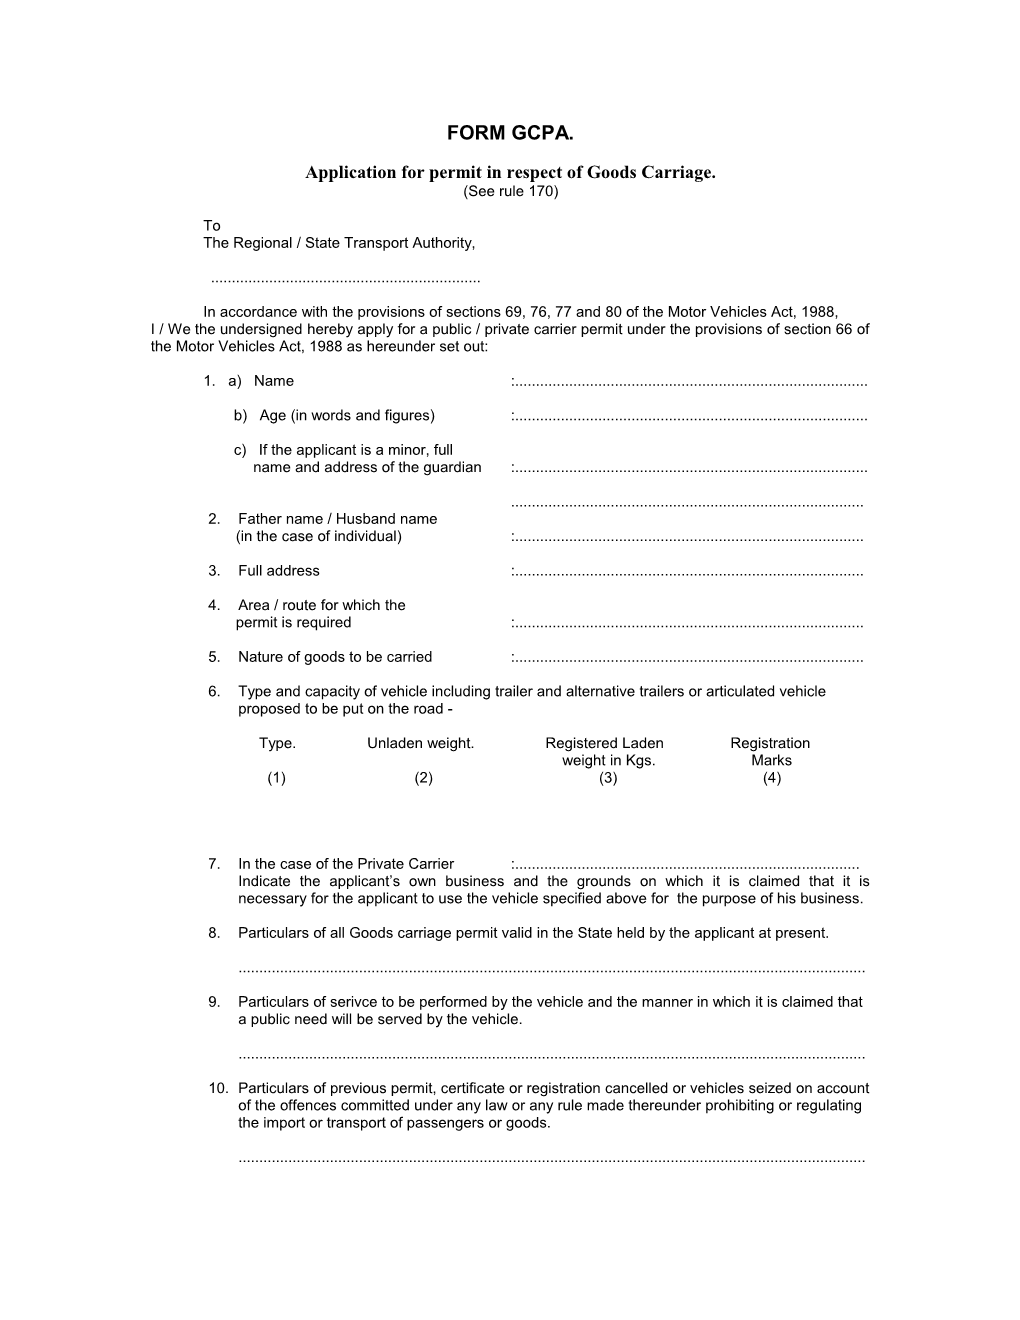 Application for Permit in Respect of Goods Carriage